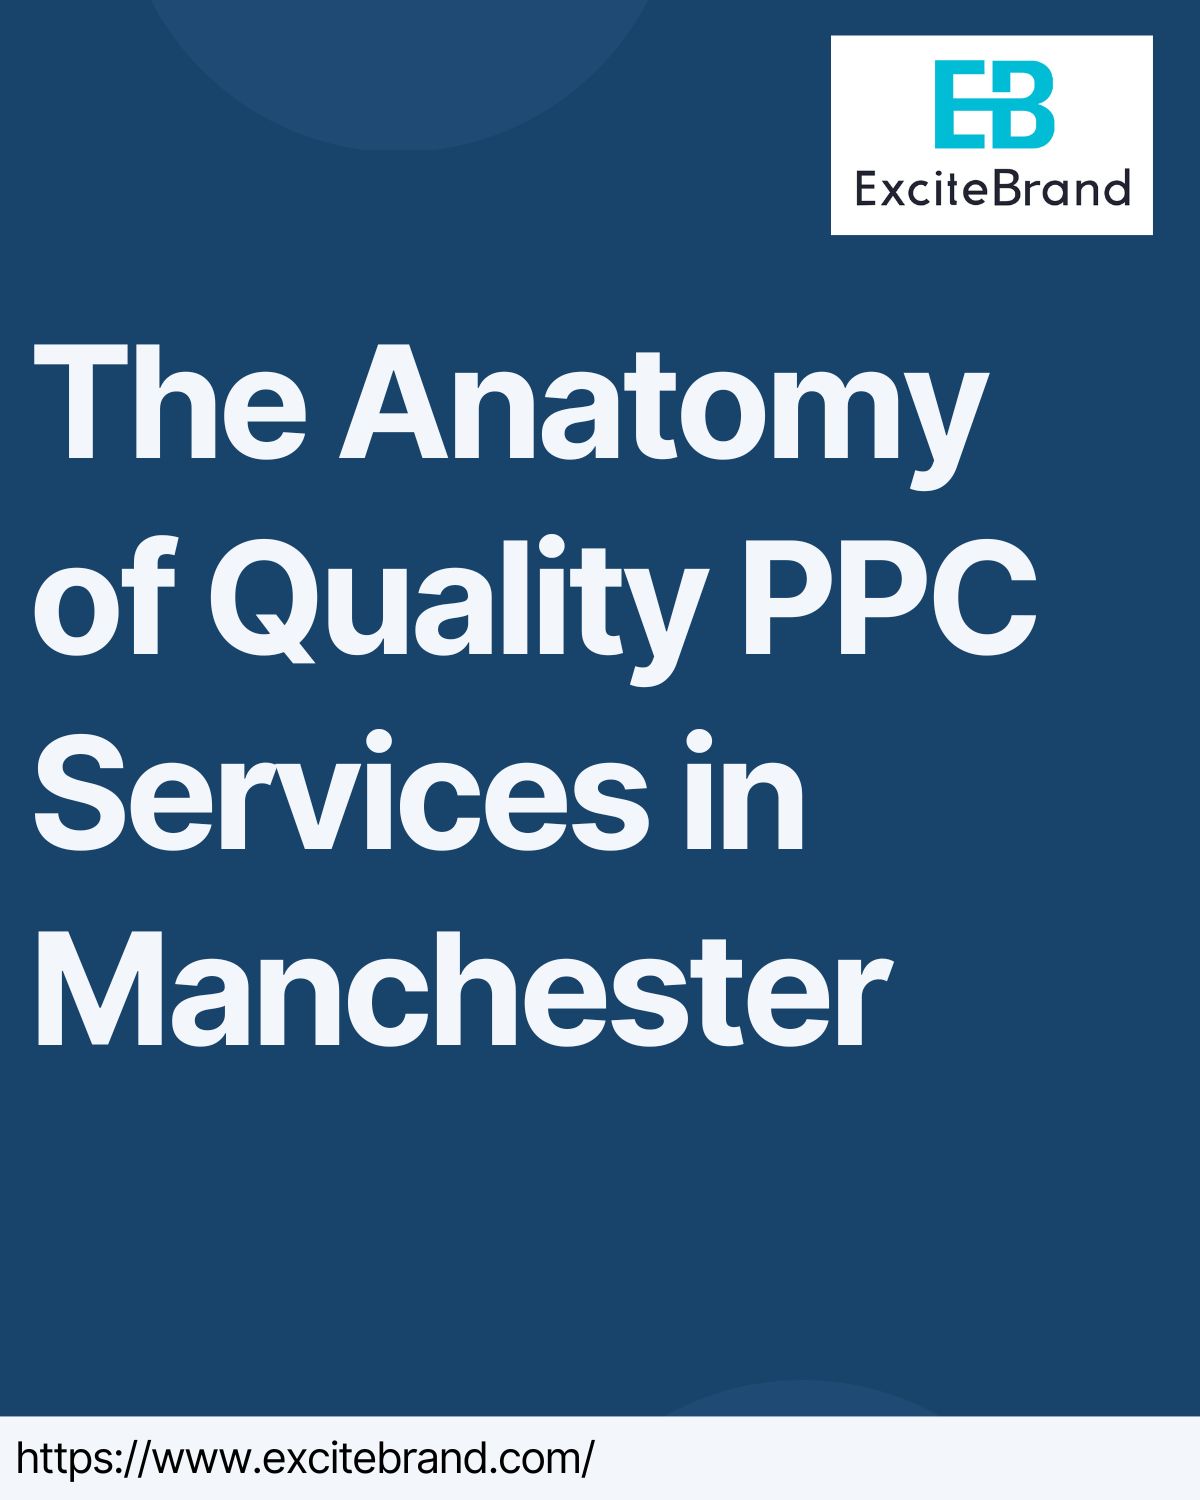 PPC Services in Manchester